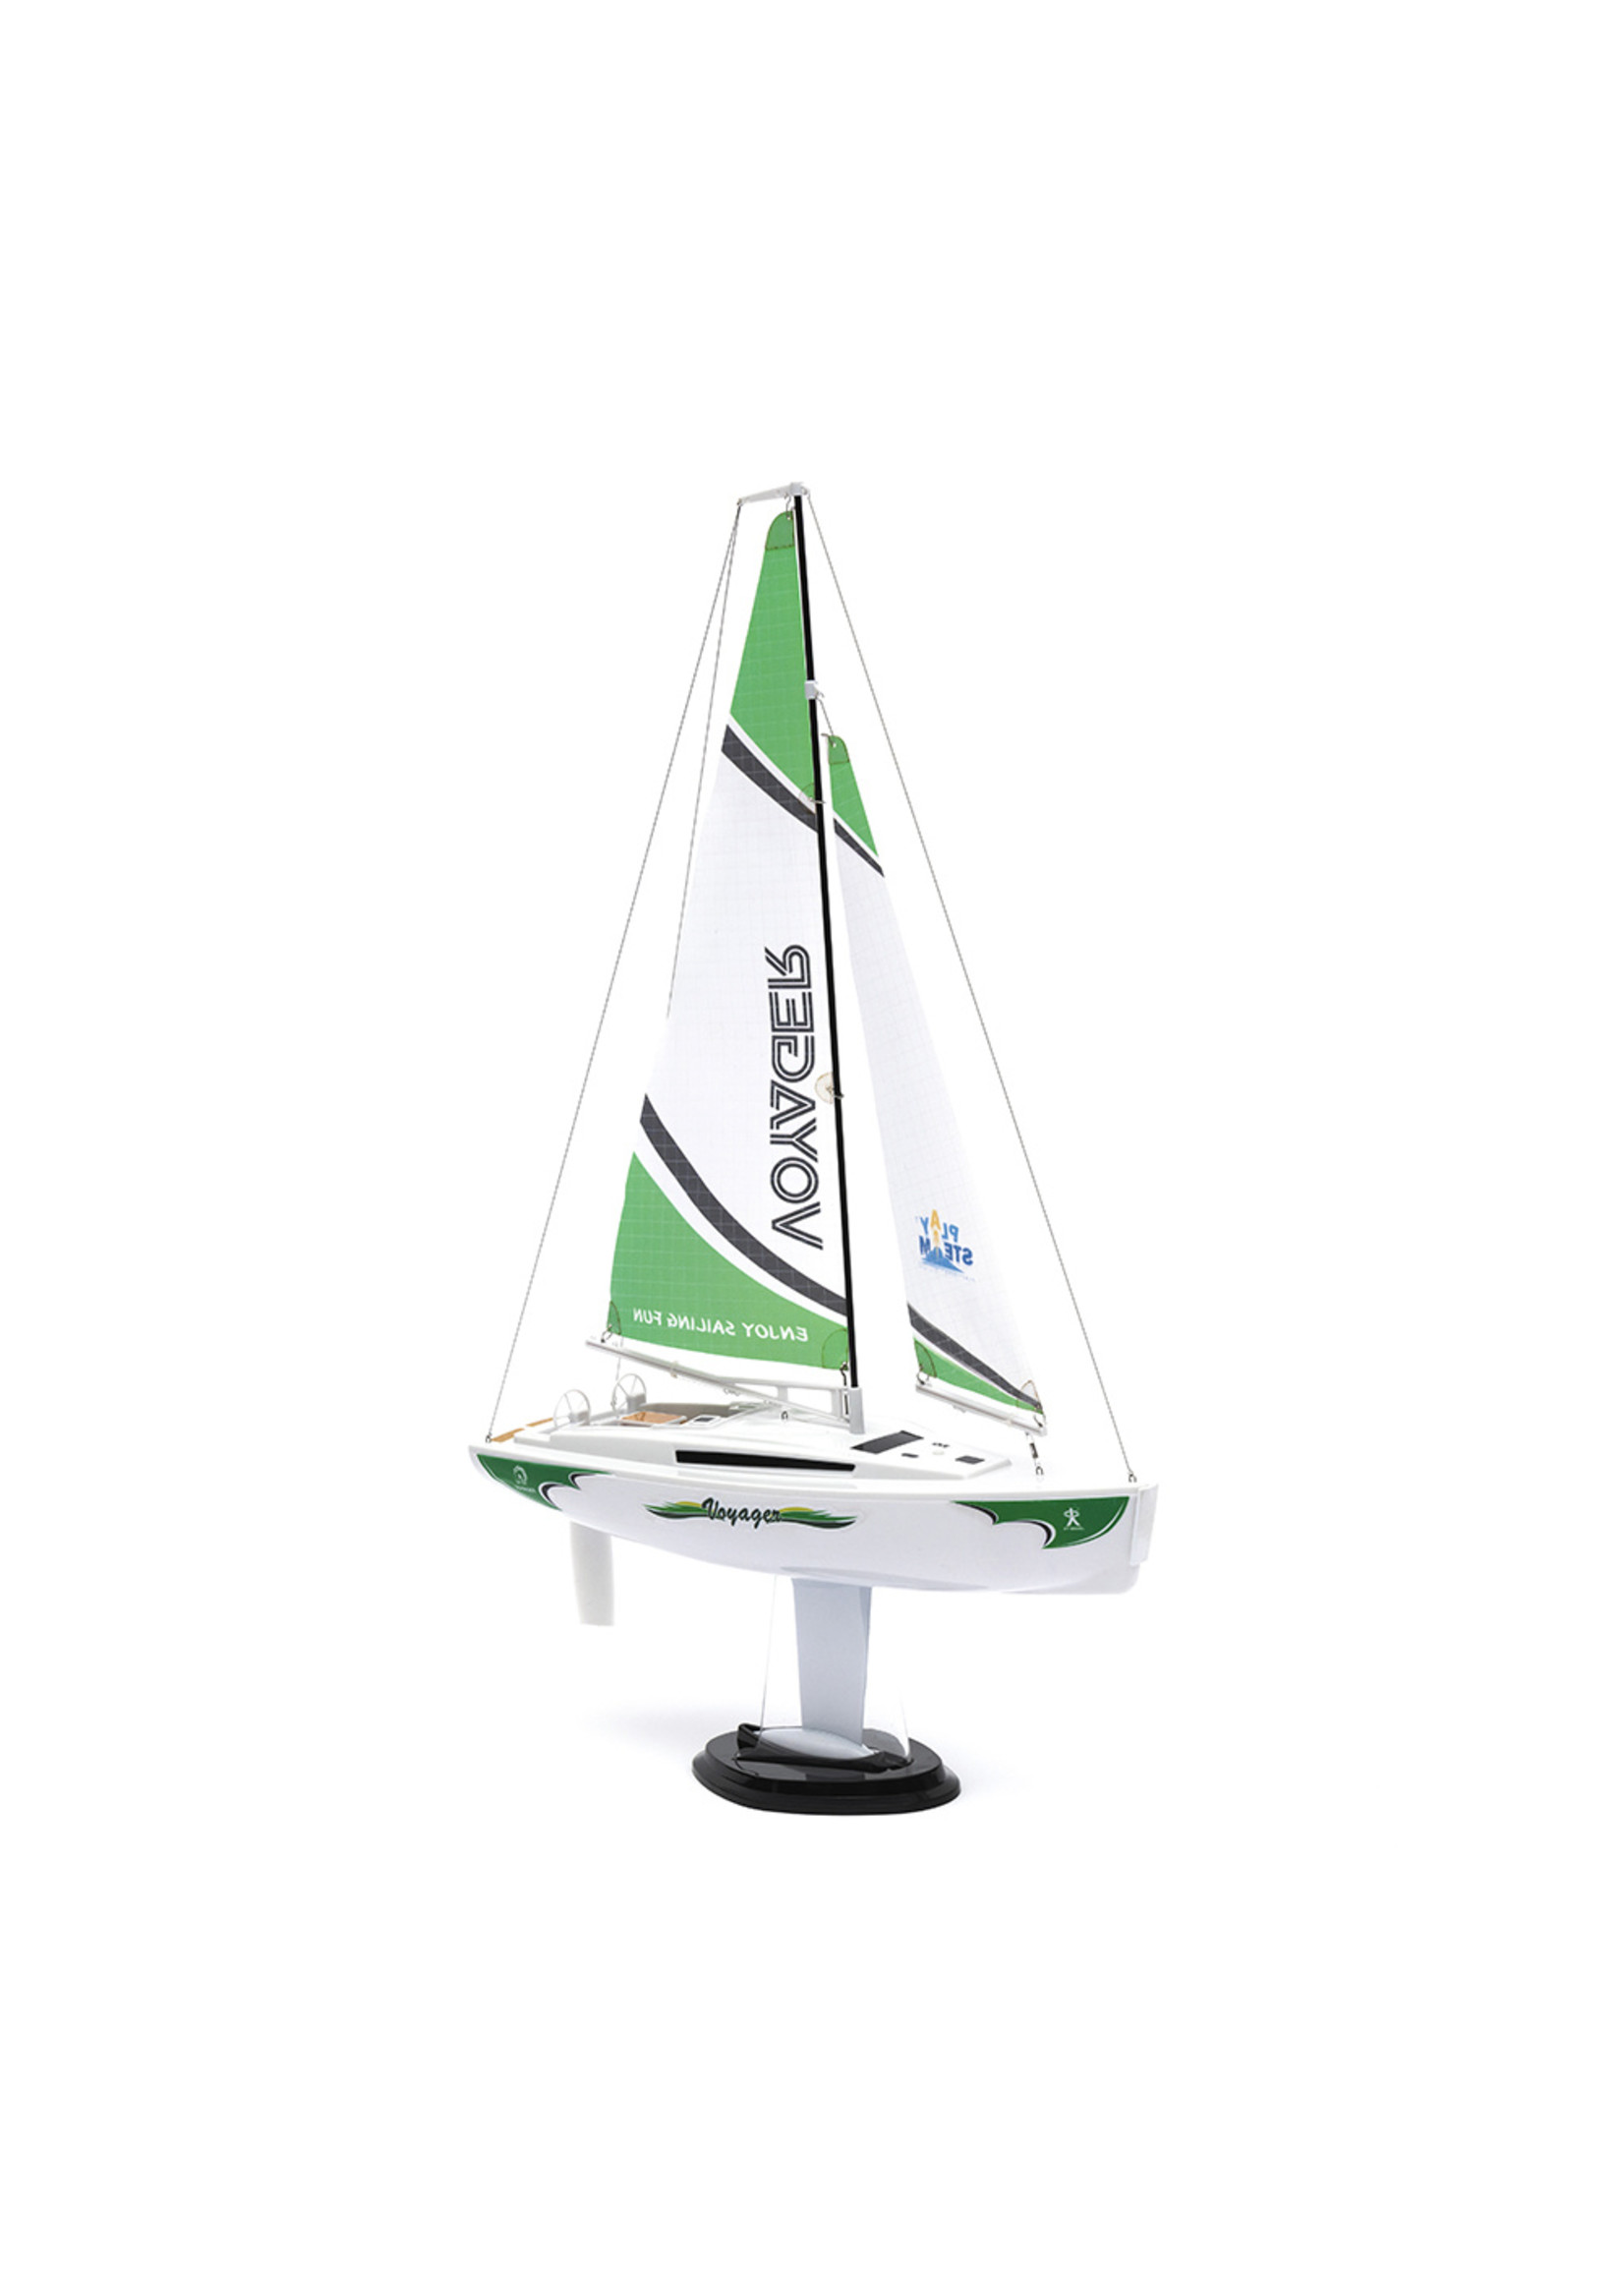 Play Steam Voyager 280 Wind-Power RC Sailboat - Green